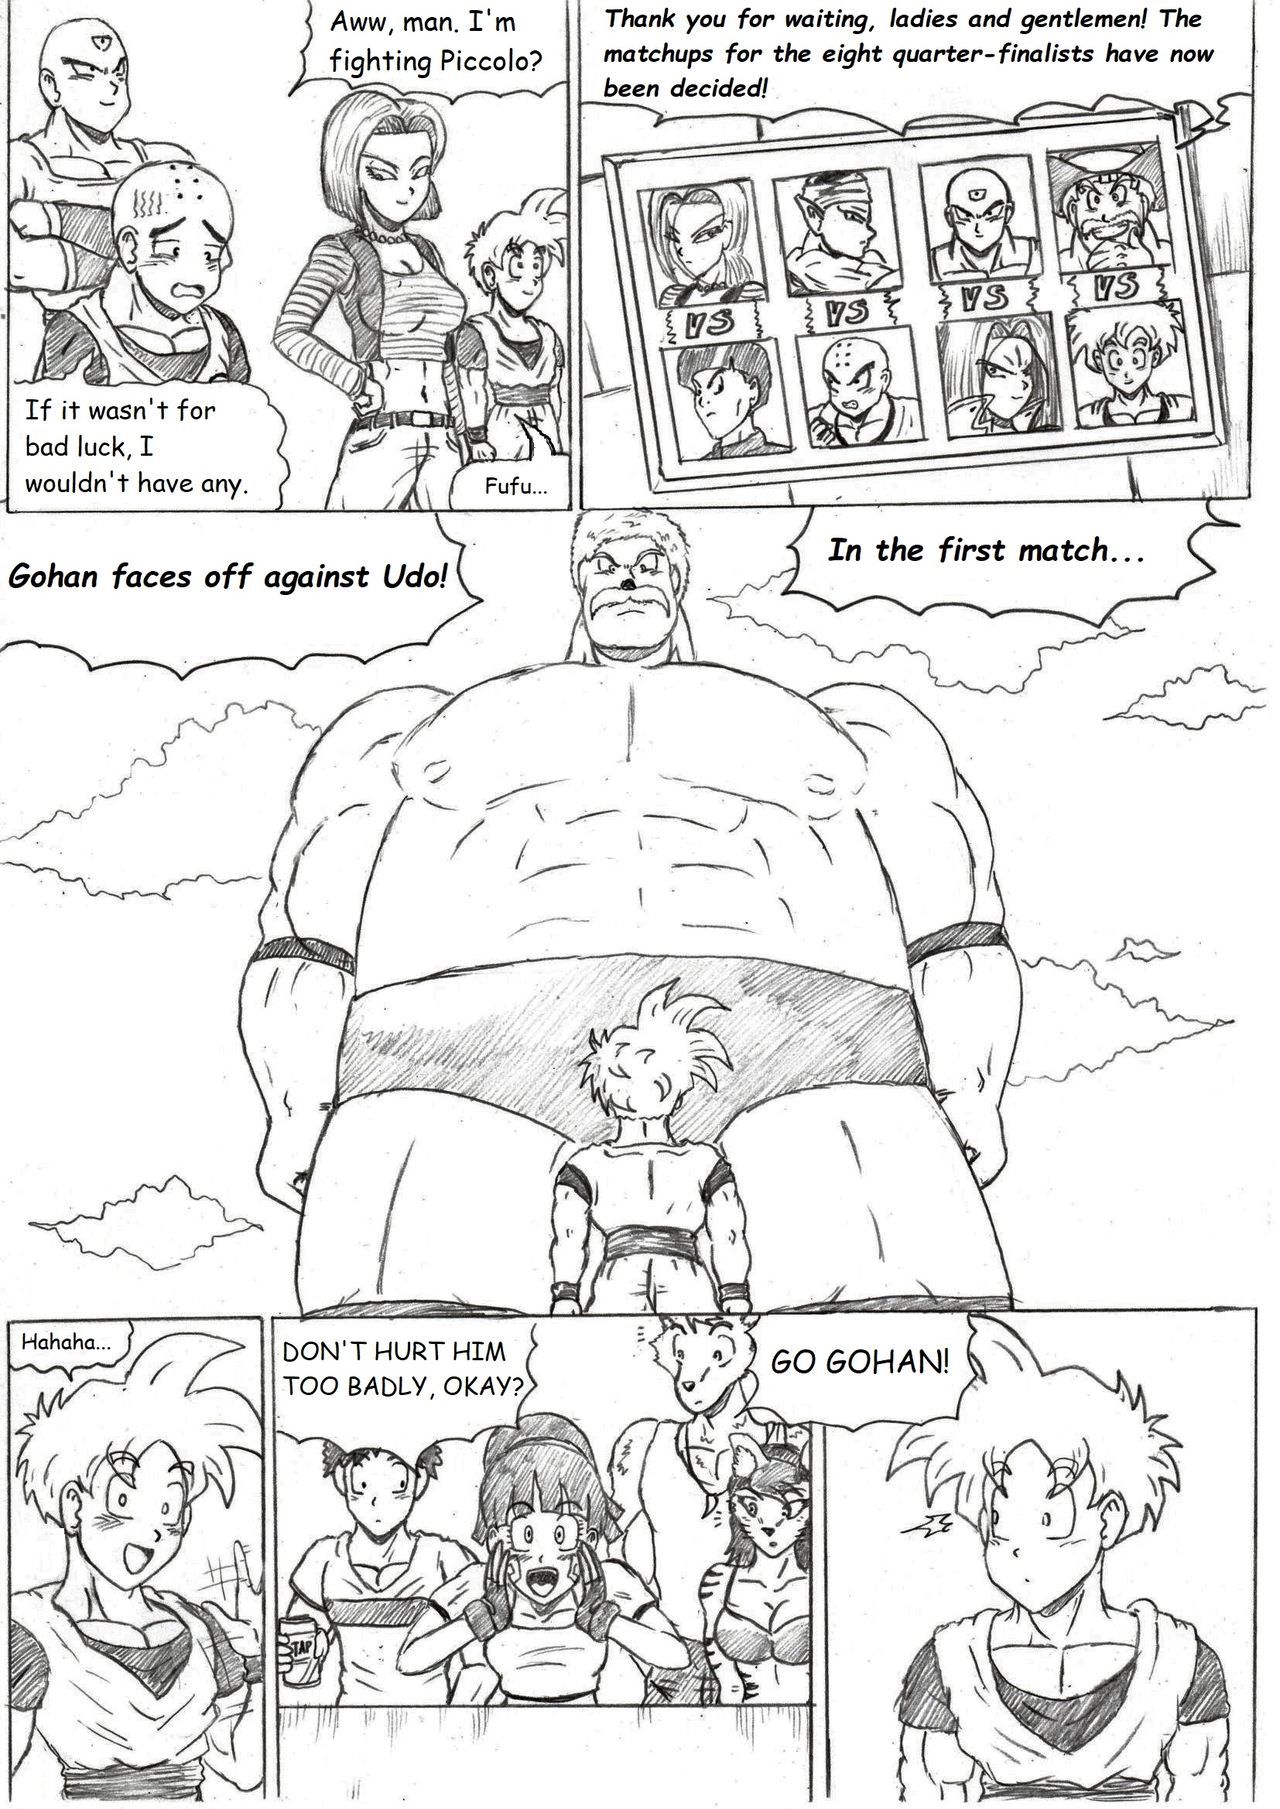 [TheWriteFiction] Dragonball Z Golden Age - Chapter 3 - The Strange Tournament (Ongoing) 41